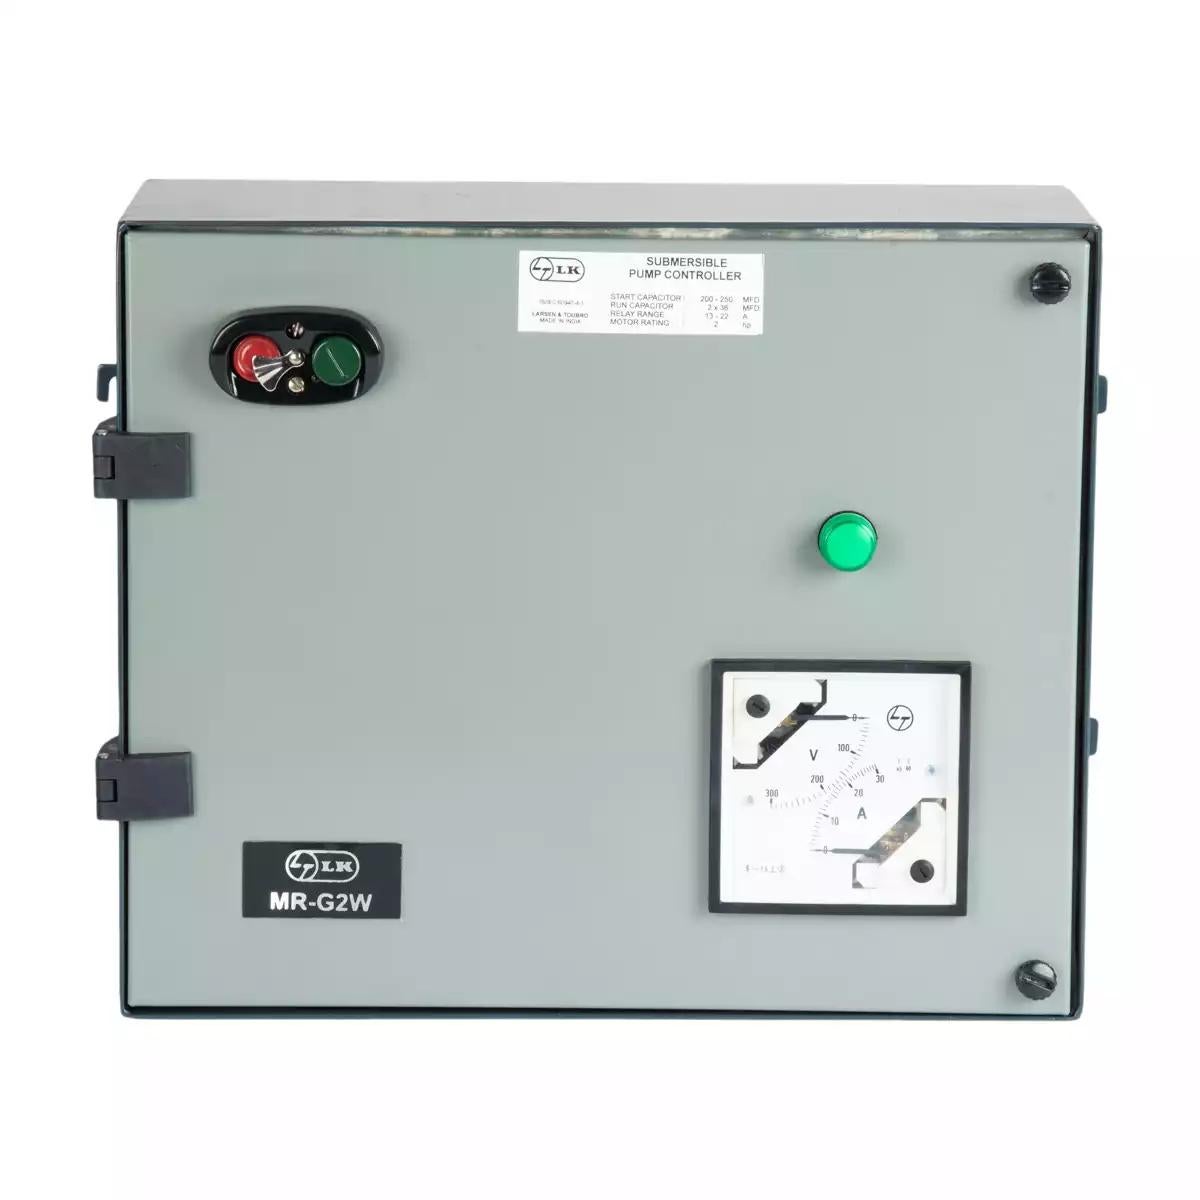 Single Phase Controller with WLC for Submersible Pump Application,MR-G2W,2HP,150 / 200mfd,2 x 36mfd